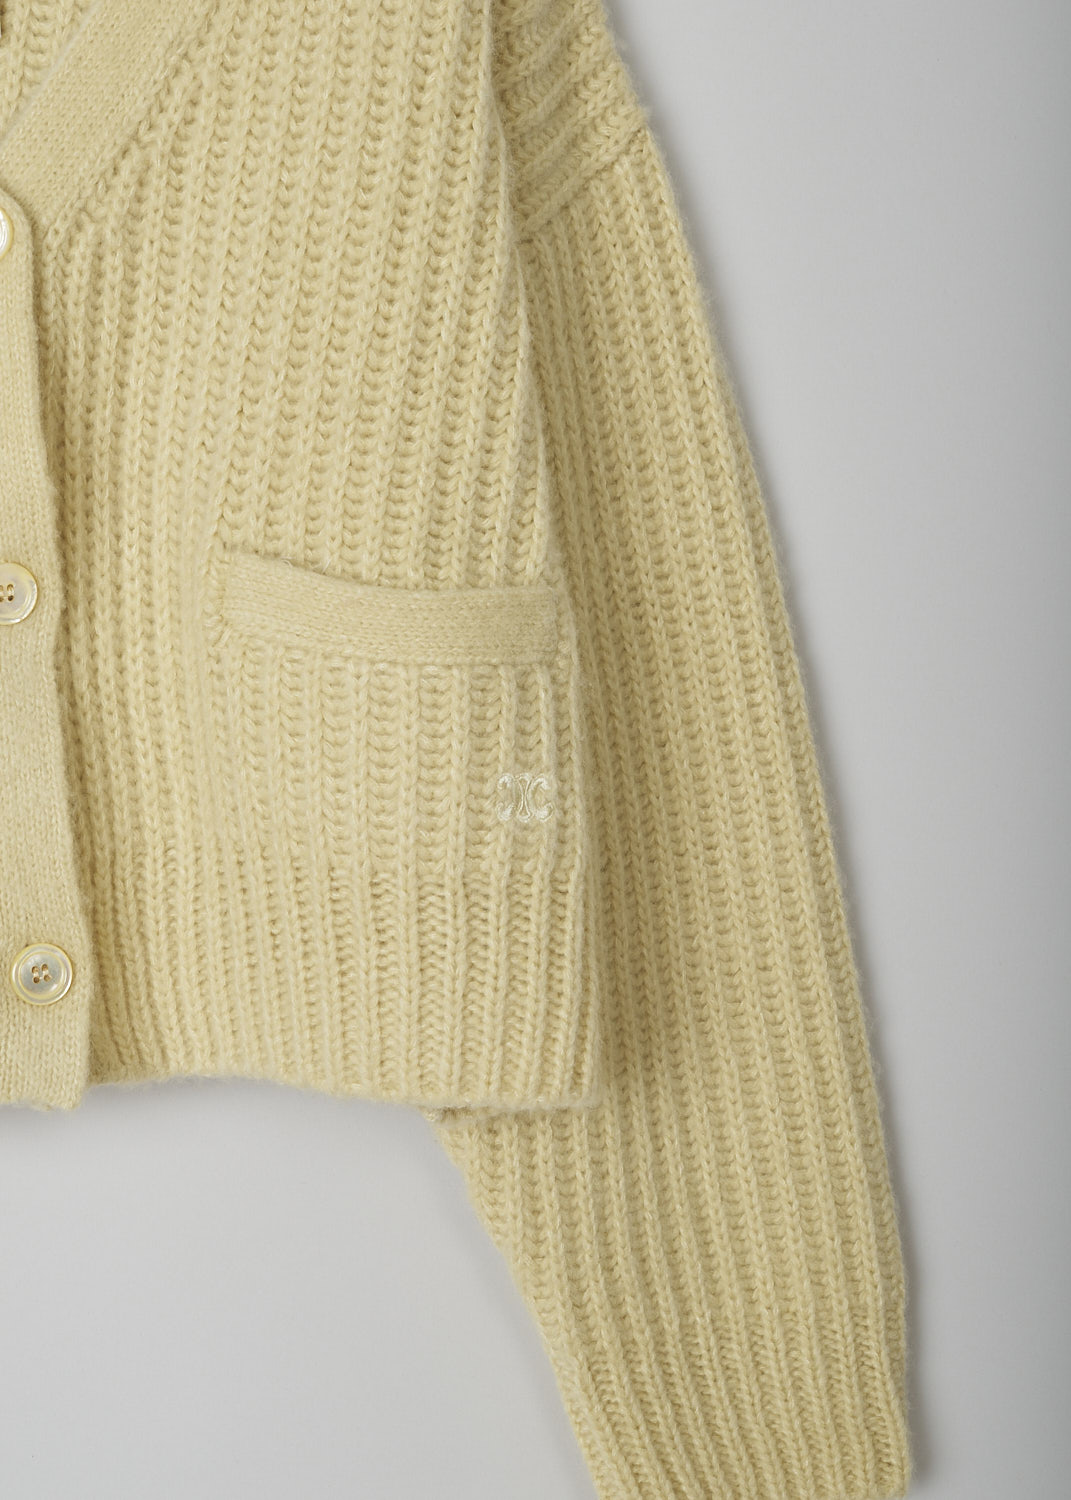 CELINE, PALE YELLOW CASHMERE CARDIGAN, 266R_2A49X_11PY,  Yellow, Detail, This pale yellow cashmere cardigan has a V-neck with a front button closure. The cardigan has dropped shoulders. In the front, the cardigan has two patch pockets. 
